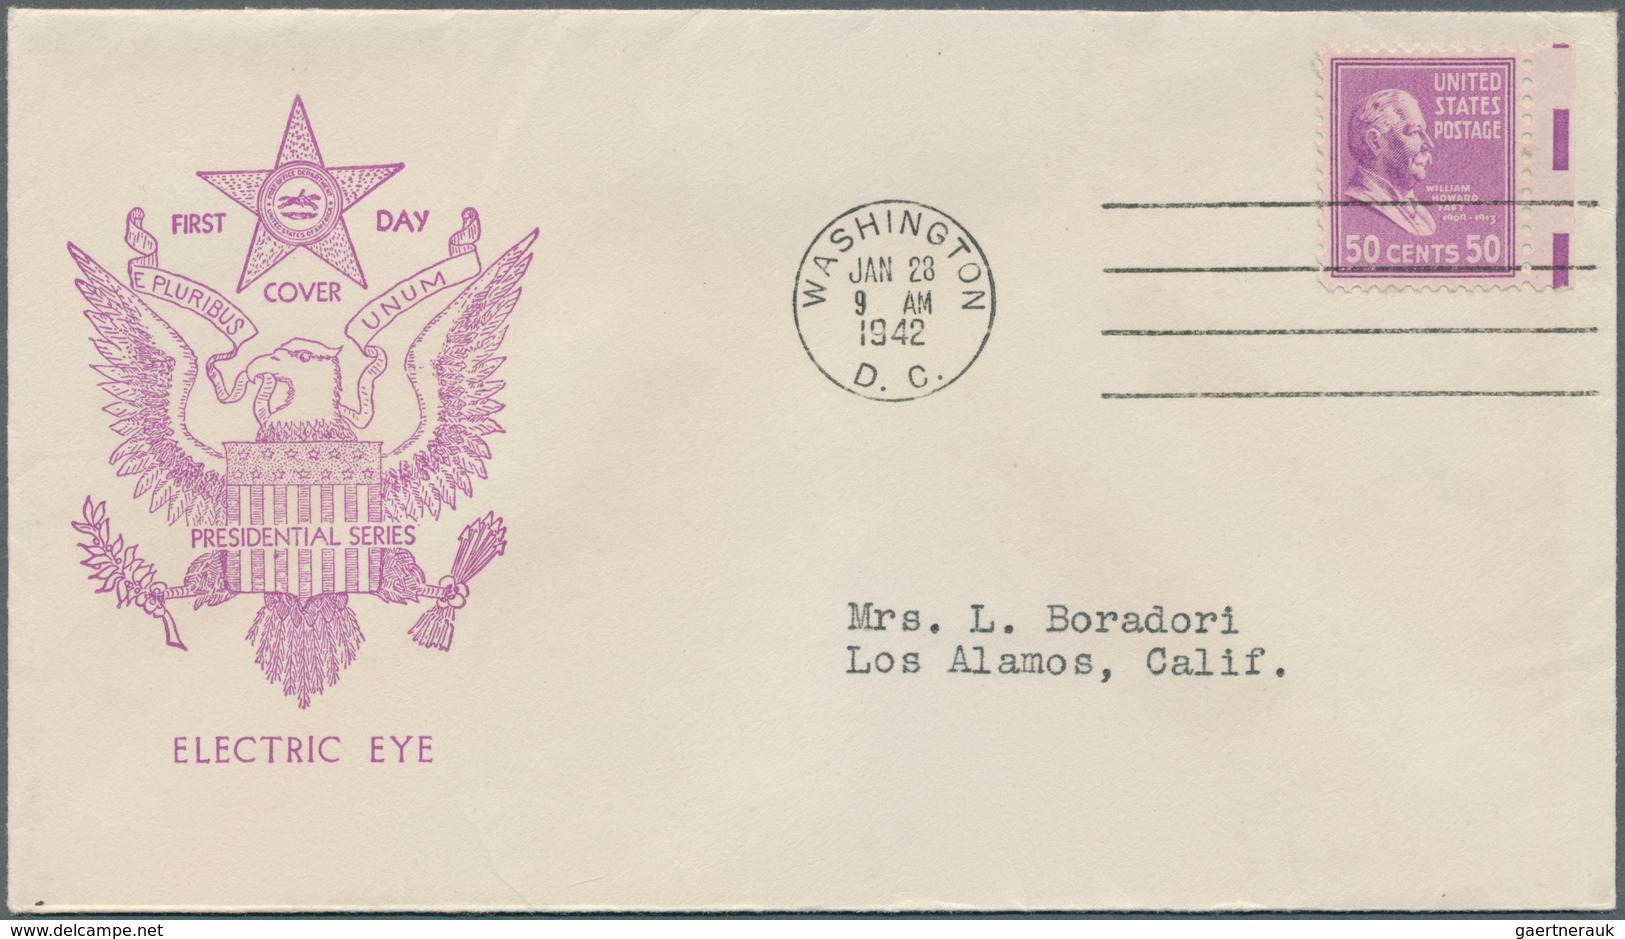 Vereinigte Staaten von Amerika: 1941/1942: 116 good FDC, many Plate Blocks, all FDC are with Borders